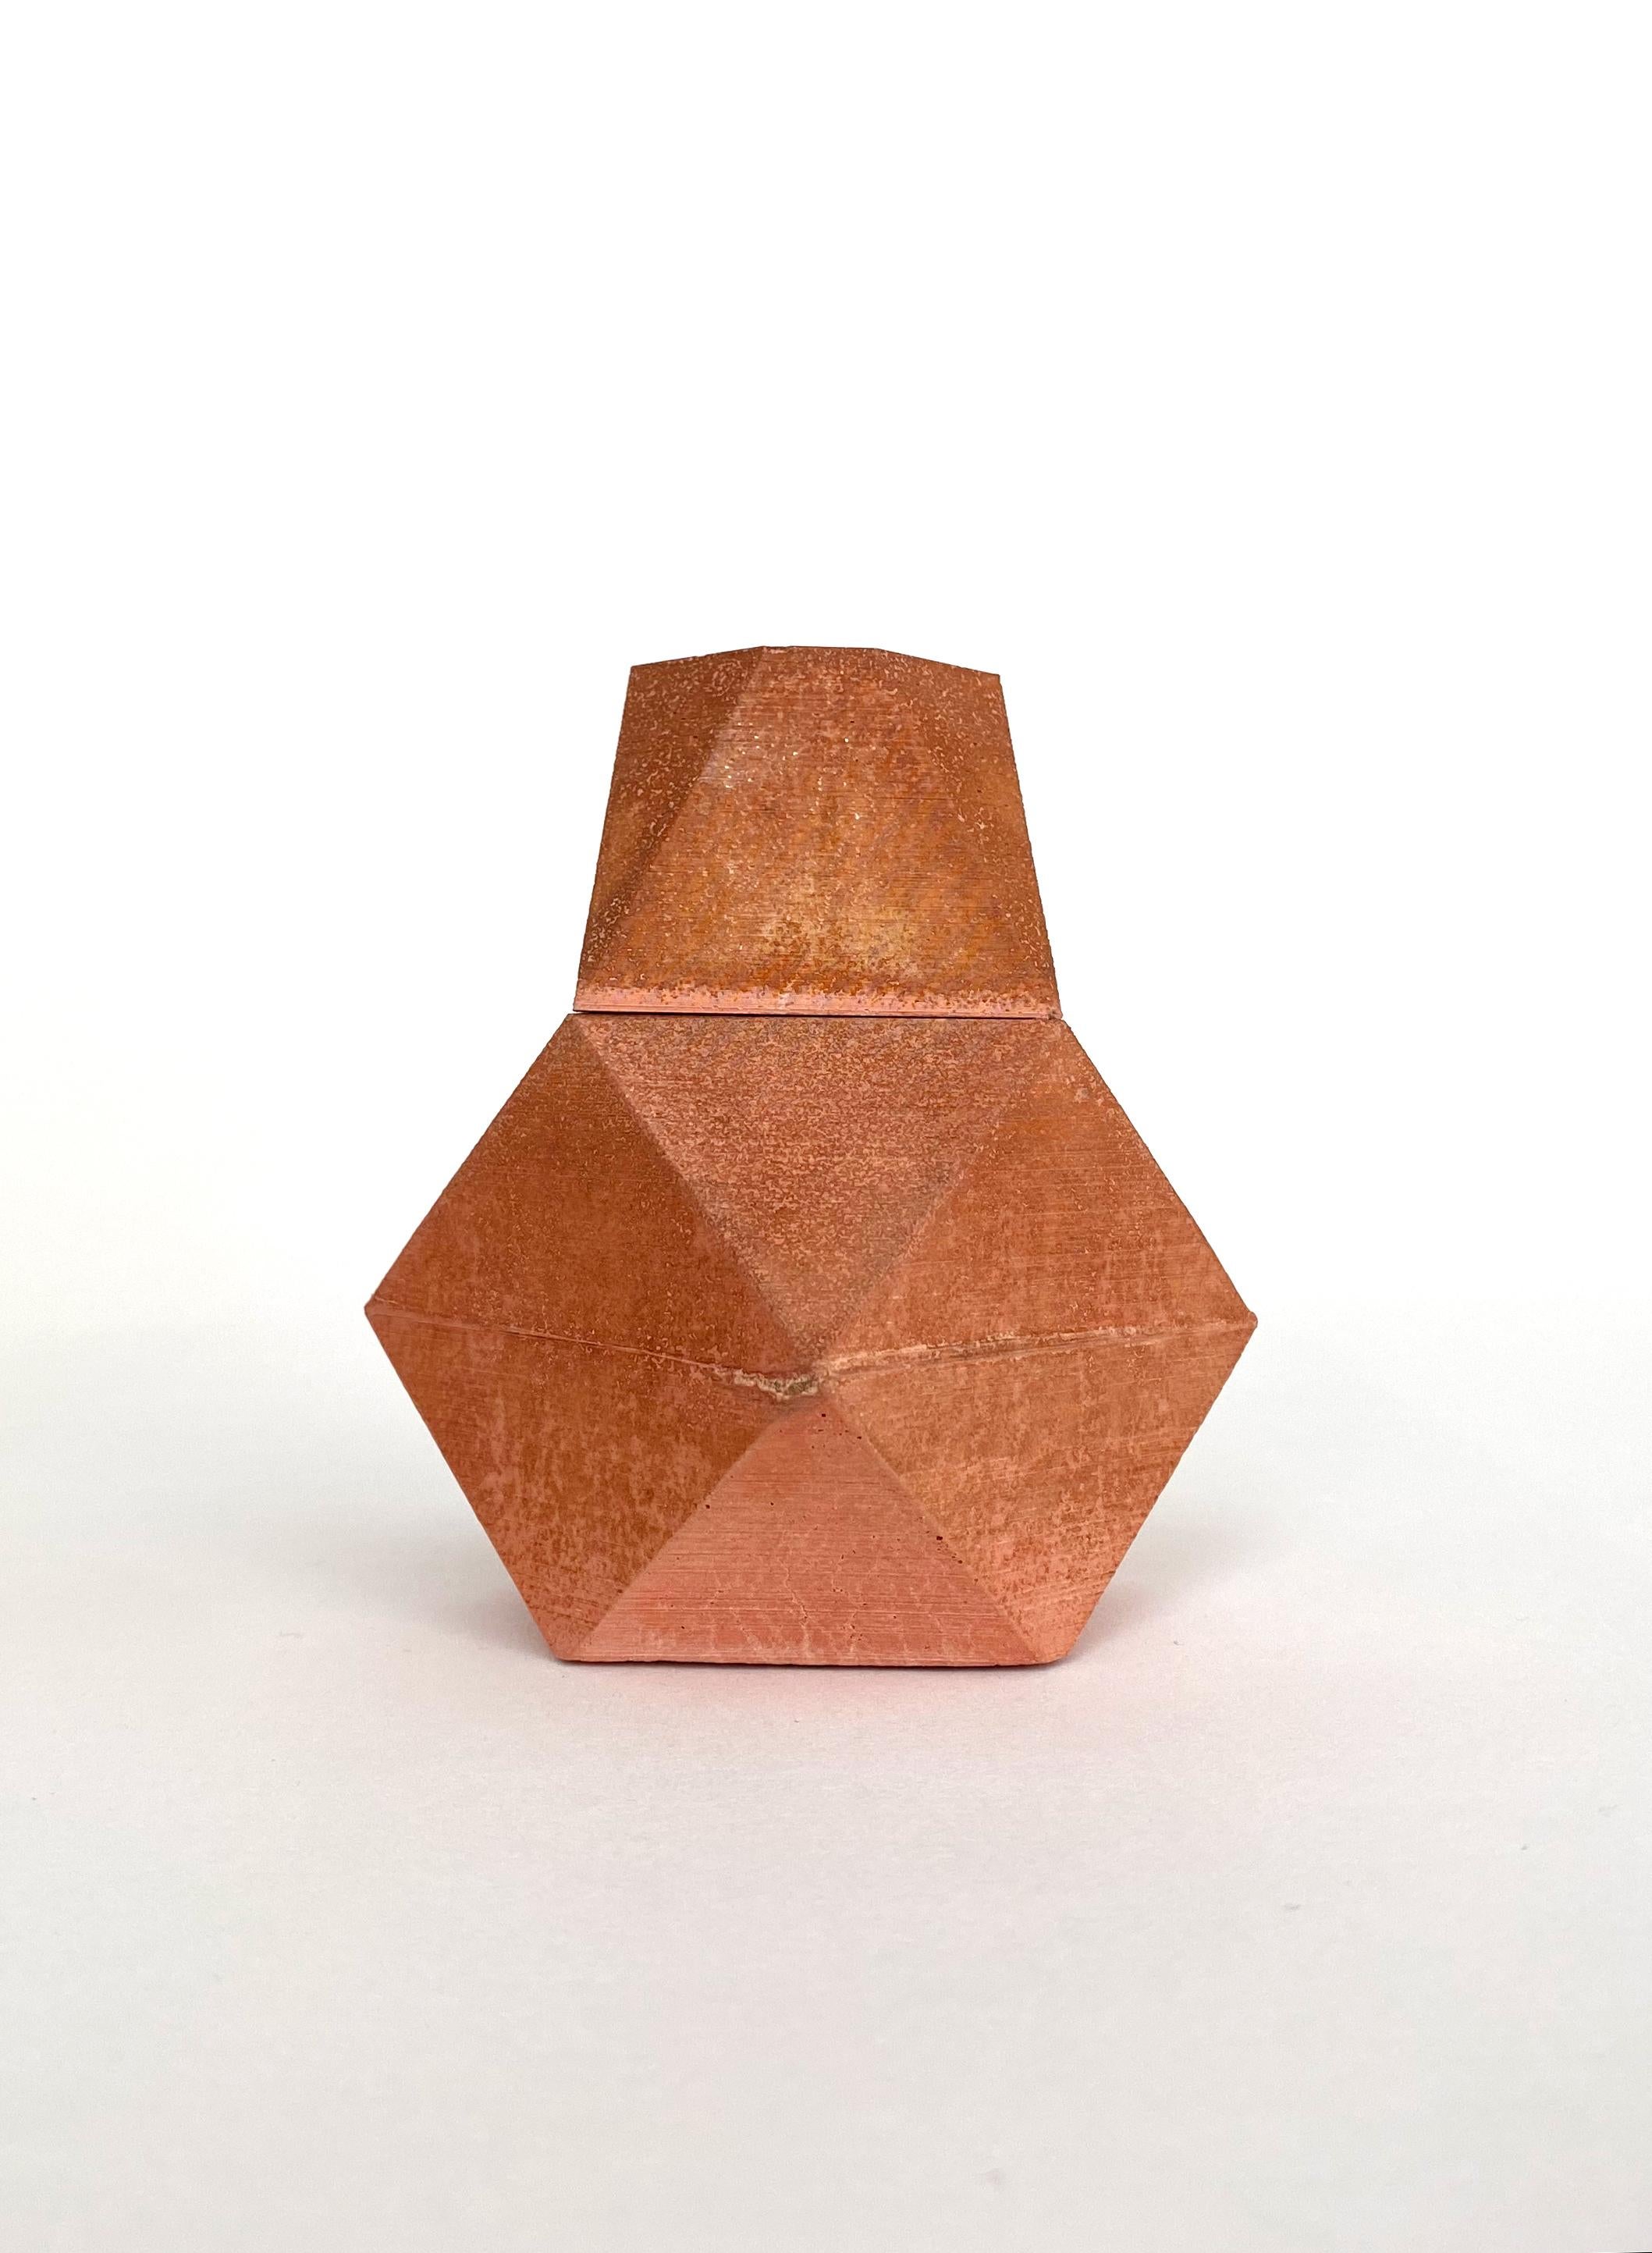 Nomad Jar Lindsey by Gilles & Cecilie
Unique
Dimensions: H 9 x W 6.5 cm
Material: terracotta with iron

Gilles and Cecilie Studio created the Nomad Jar Family to explore drawing in three dimensions. The series of objects that can stand alone or